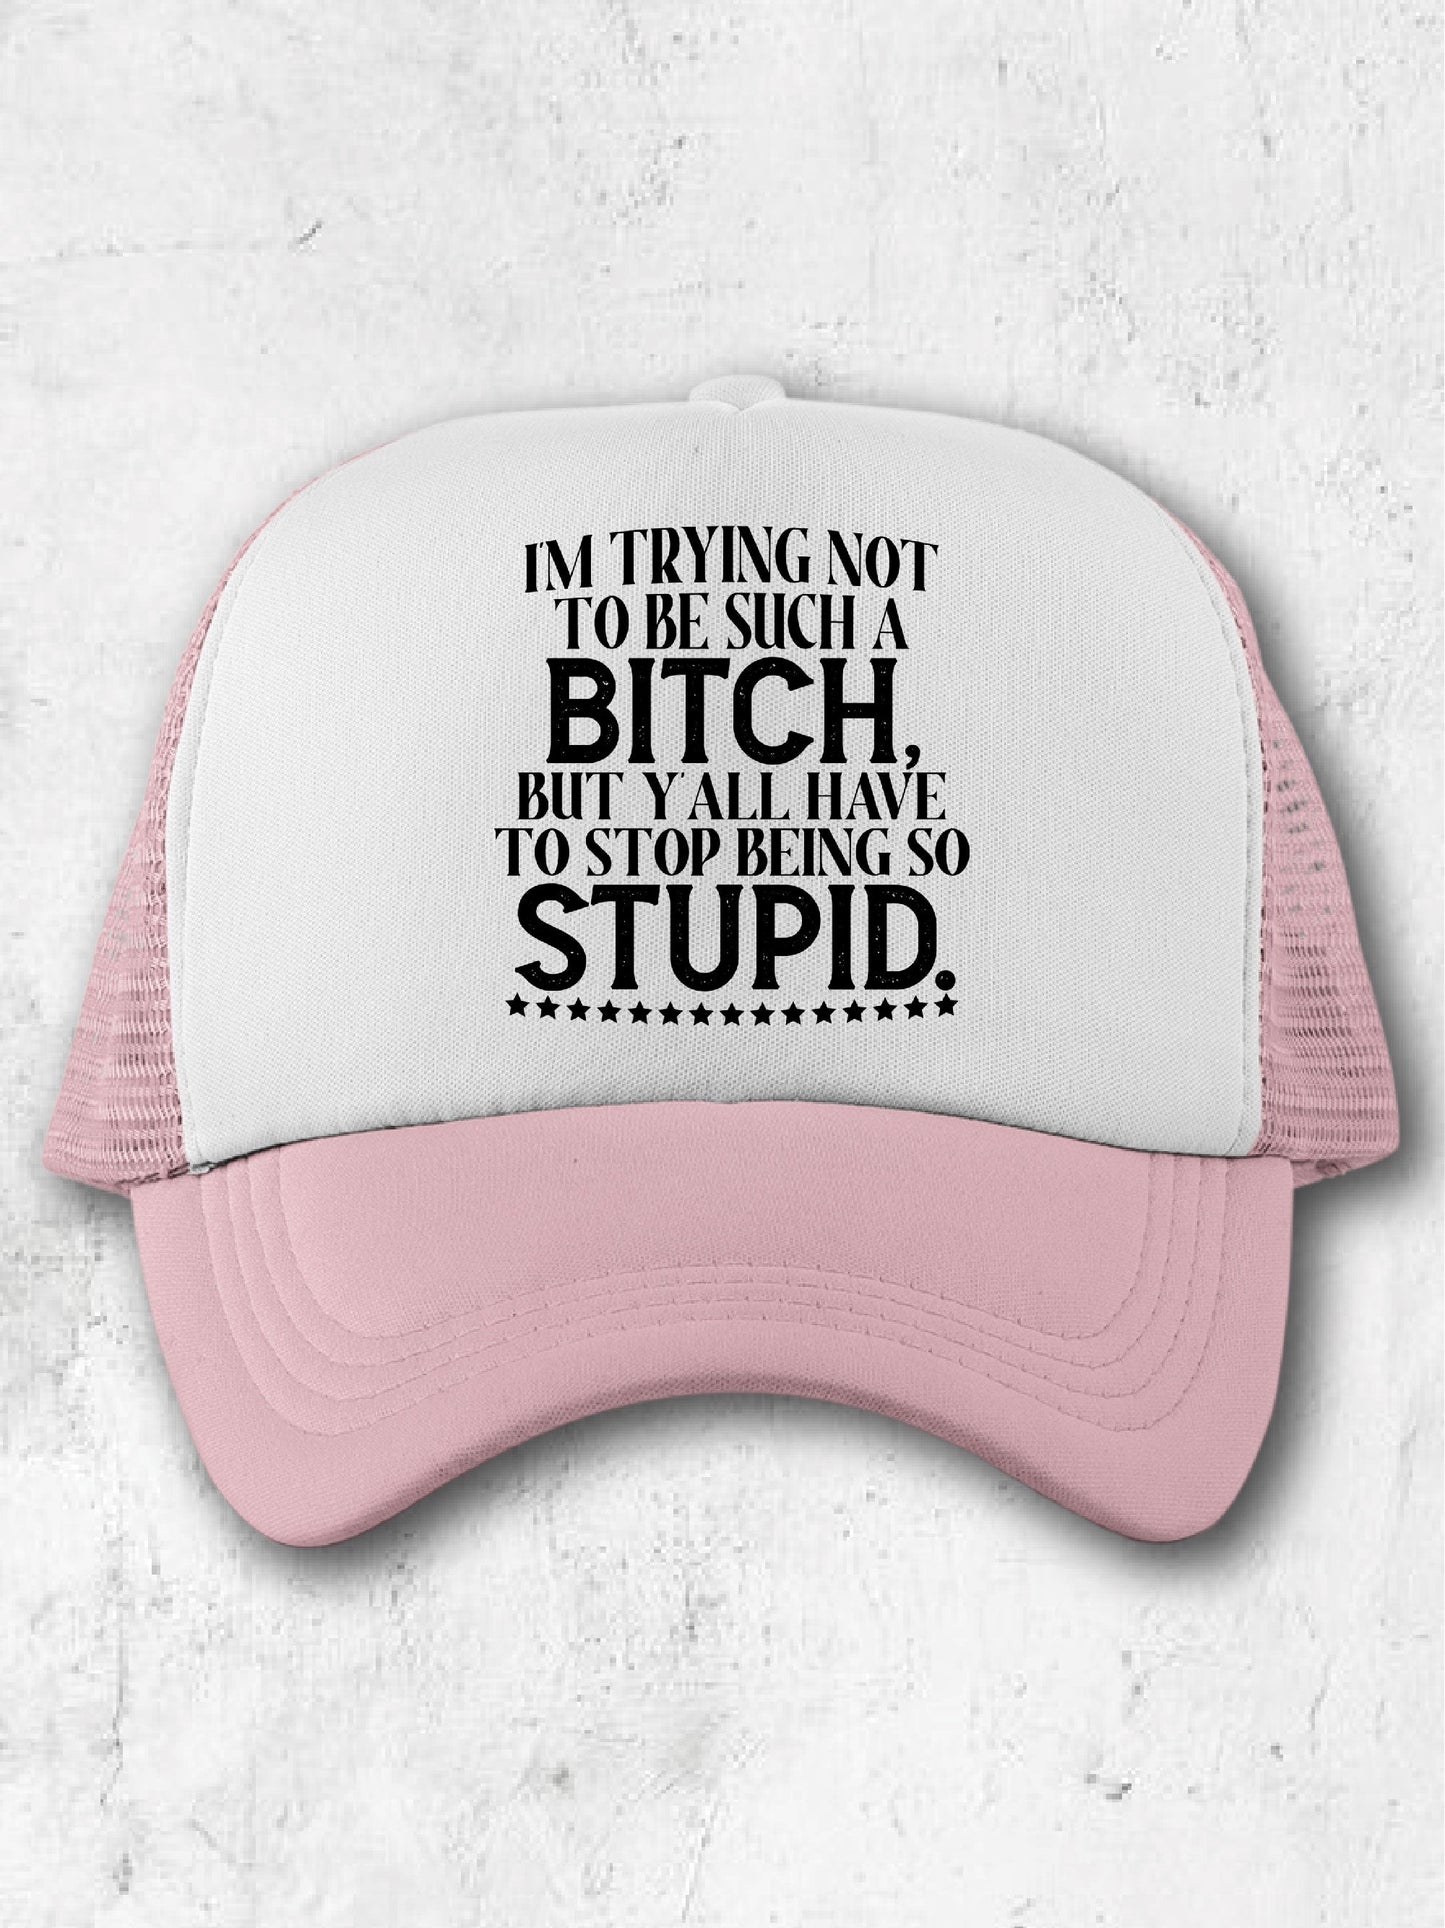 I'm Trying To Not Be Such A B--ch, But Y'all Have To Stop Being So Stupid. - (Hat)